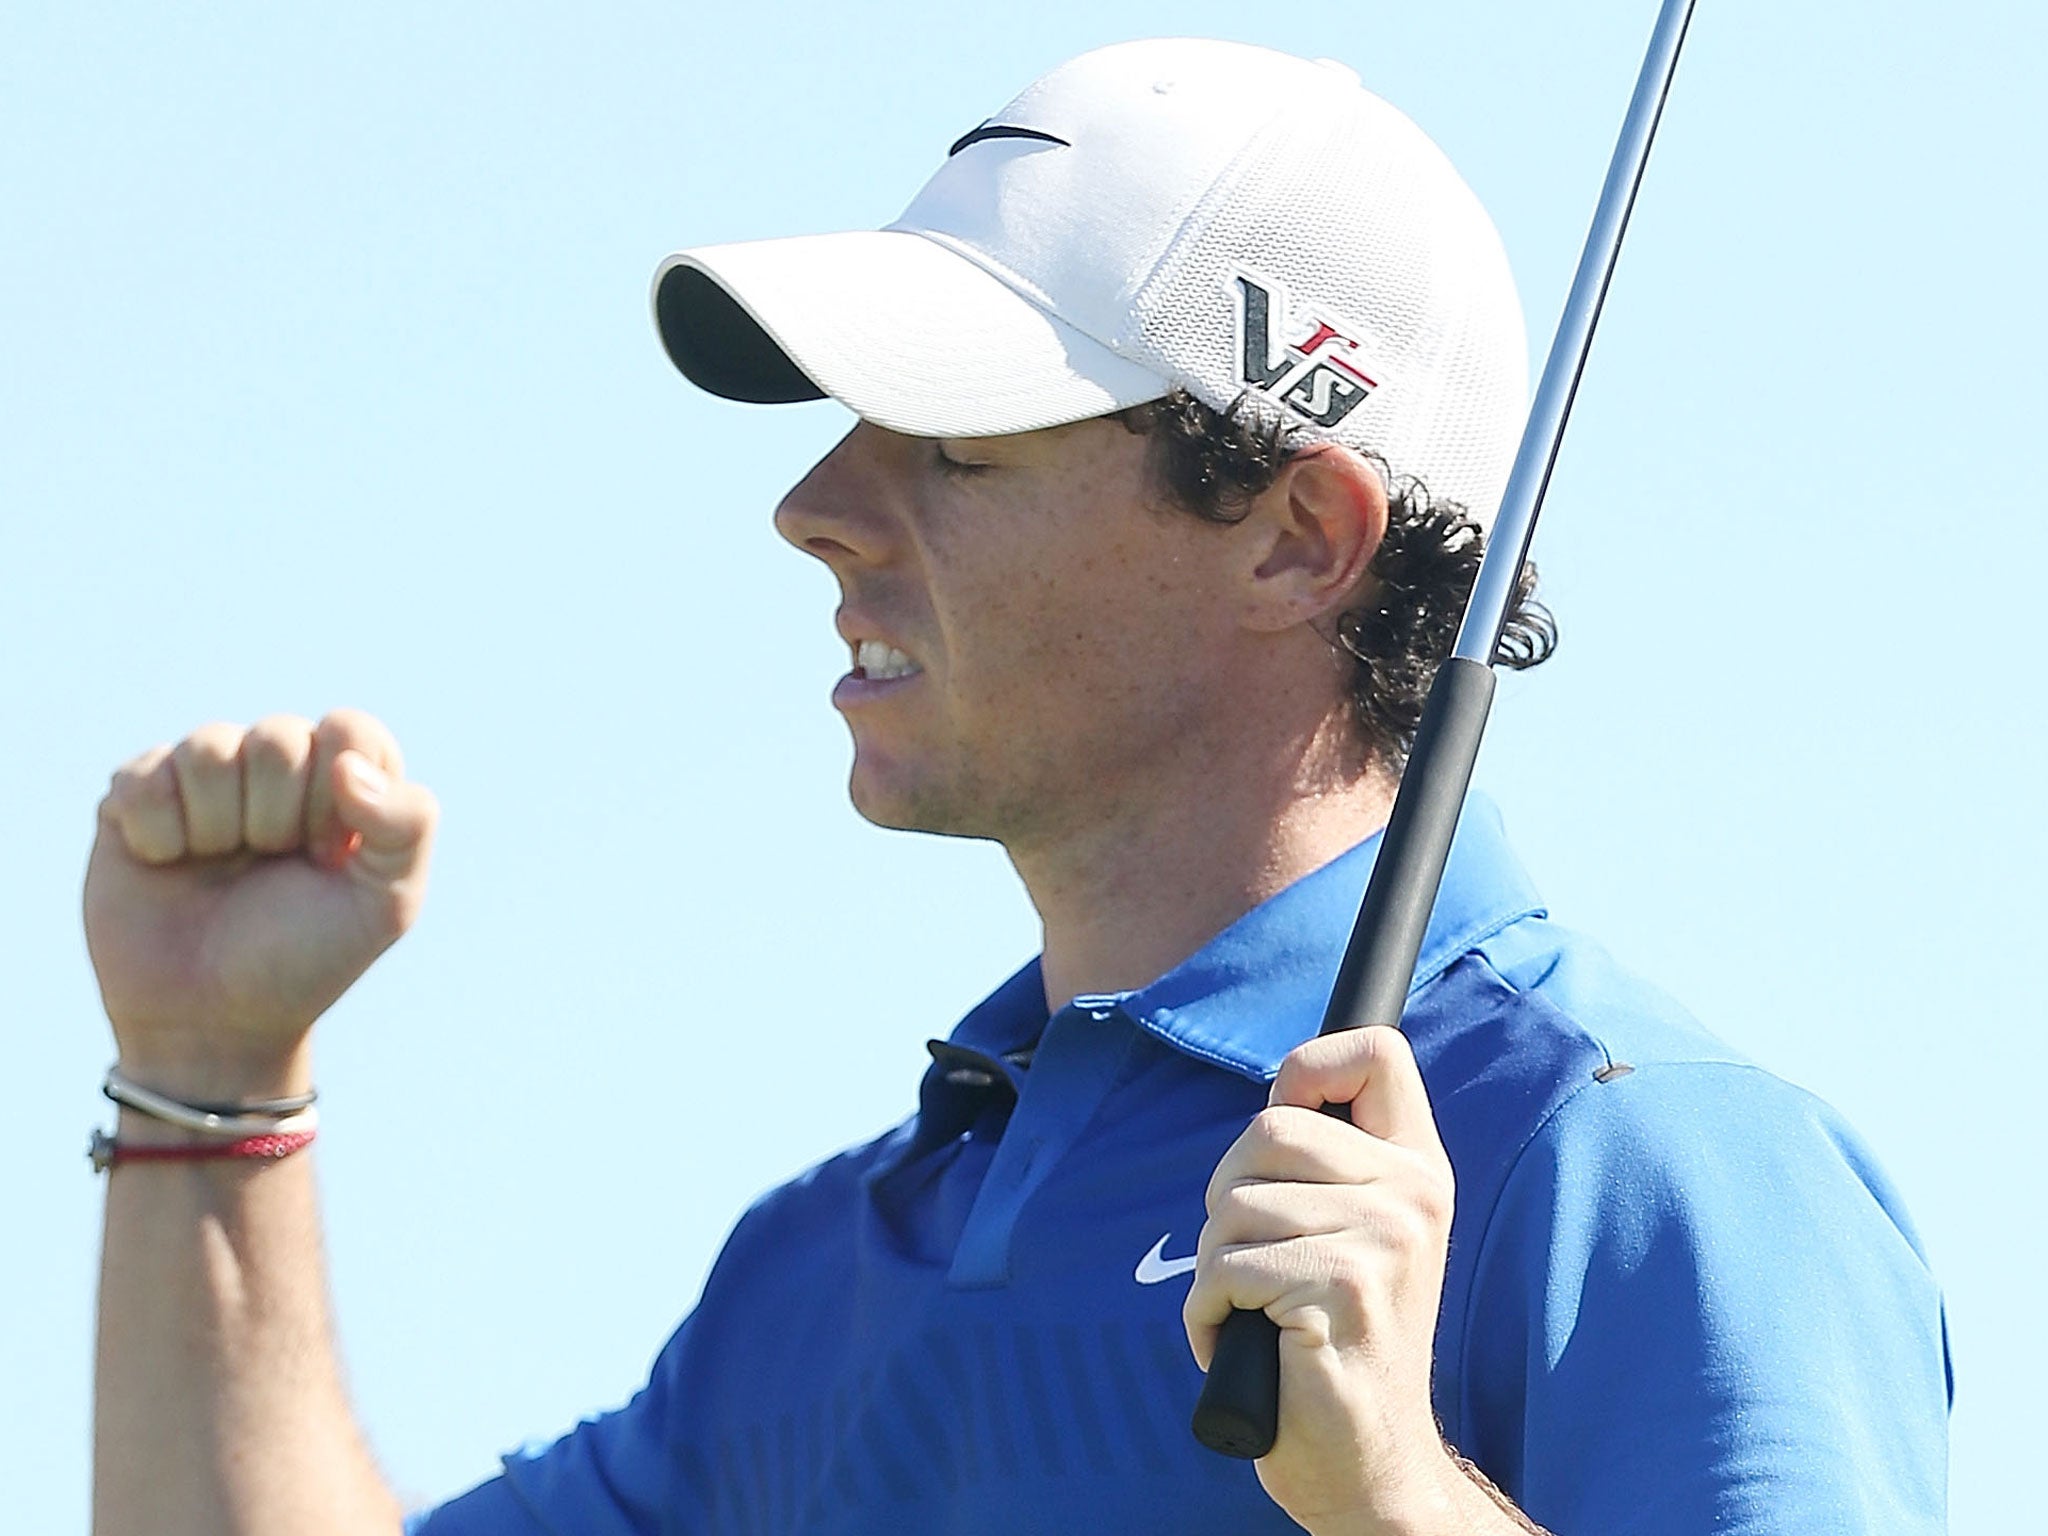 Rory McIlroy on the 18th hole after winning the Australian Open